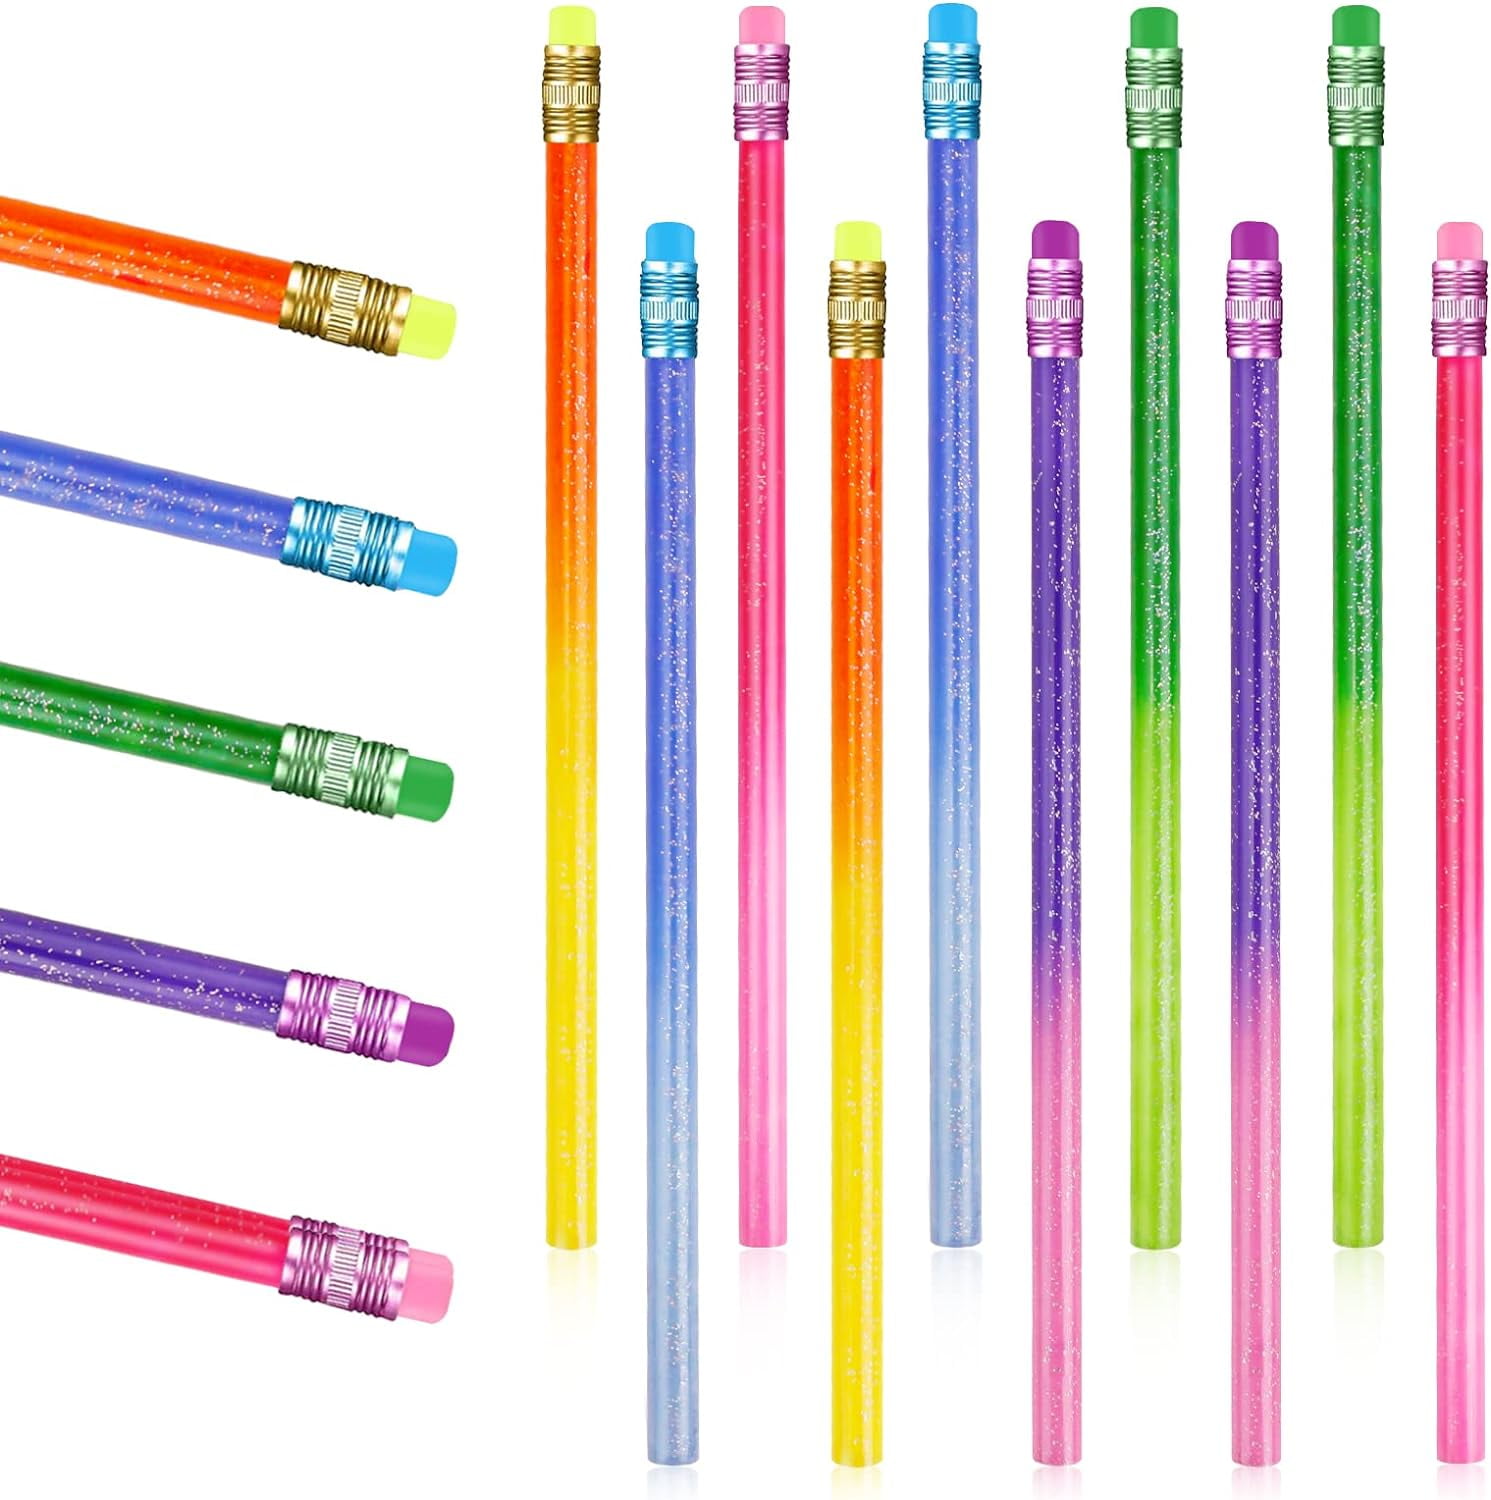 New scented pencils could put students in the mood to learn